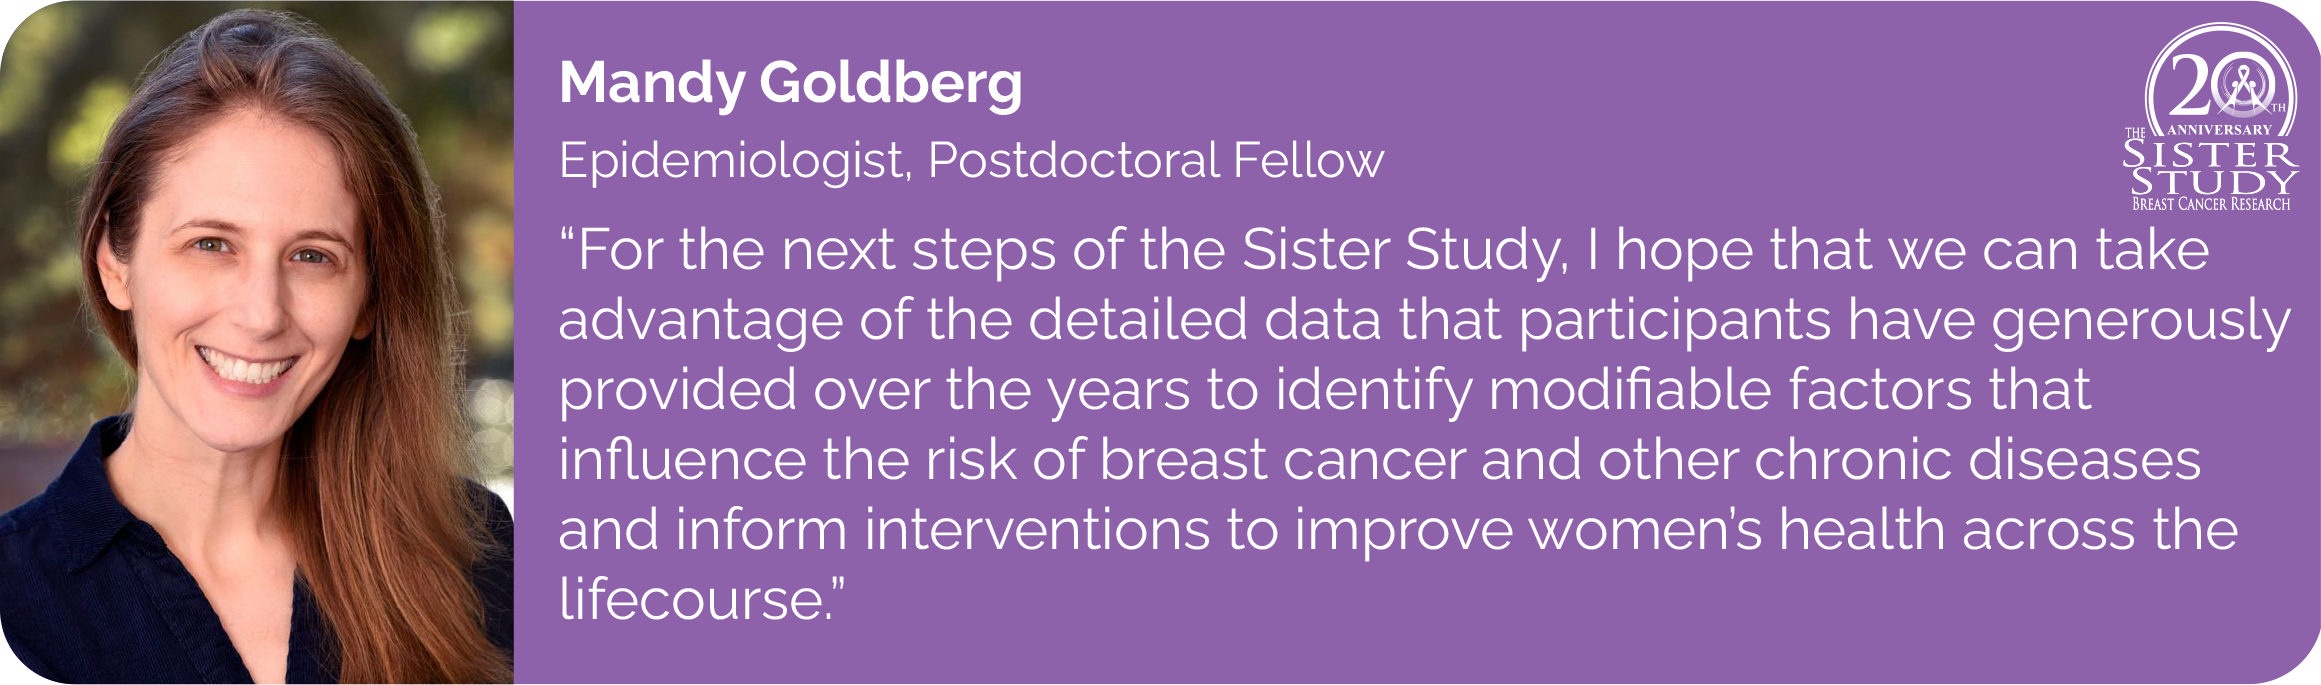 Mandy Goldberg
Epidemiologist, Postdoctoral Fellow
- For the next steps of the Sister Study, I hope that we can take
advantage of the detailed data that participants have generously
provided over the years to identify modifiable factors that influence the risk of breast cancer and other chronic diseases and inform interventions to improve women’s health across the
lifecourse.